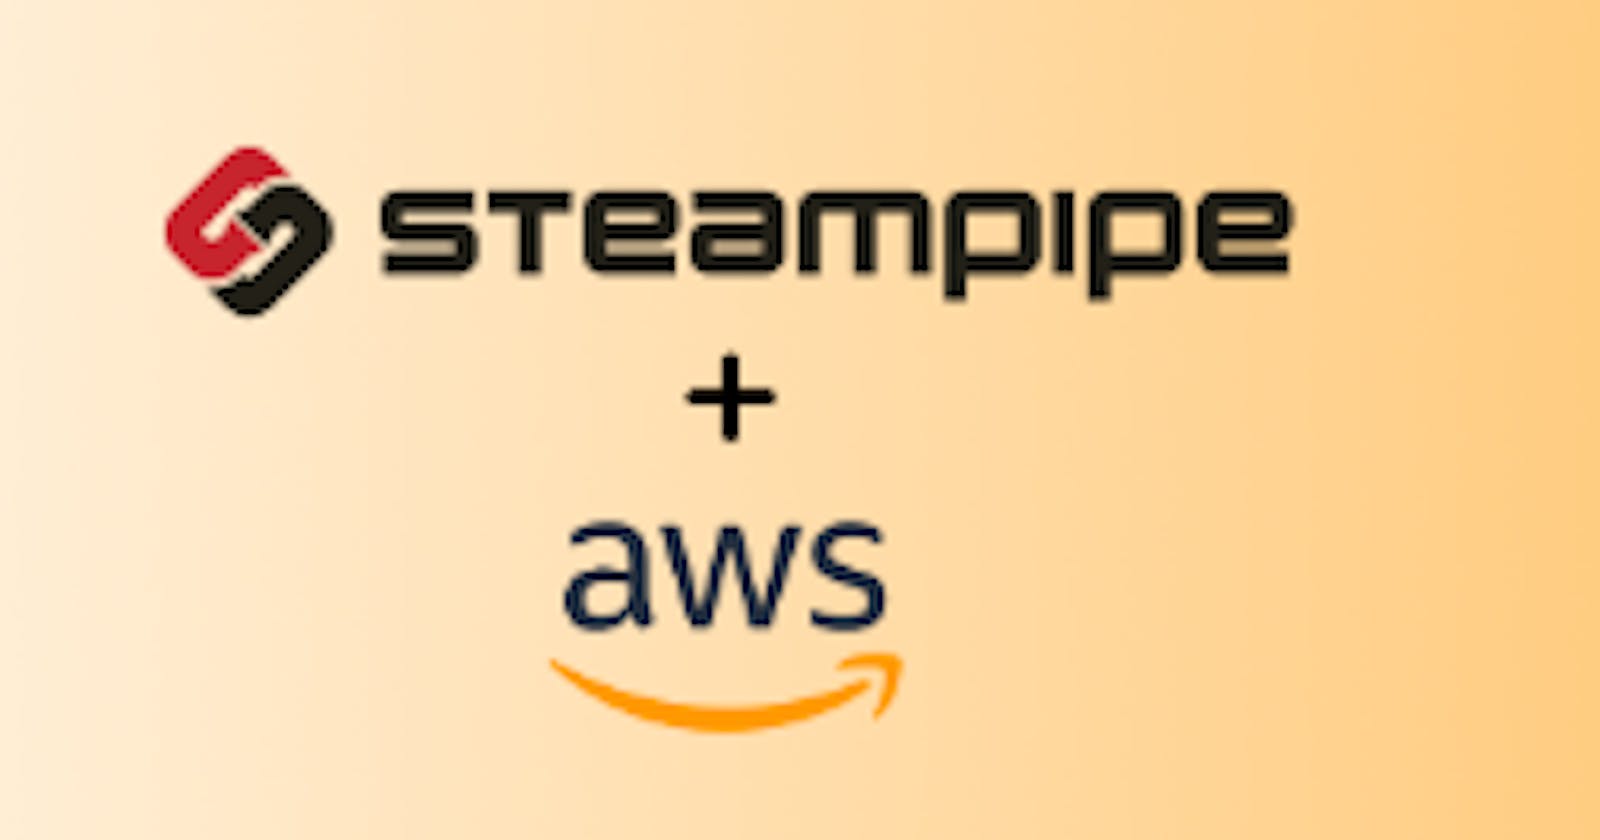 Auditing AWS compliance using Steampipe and SQL